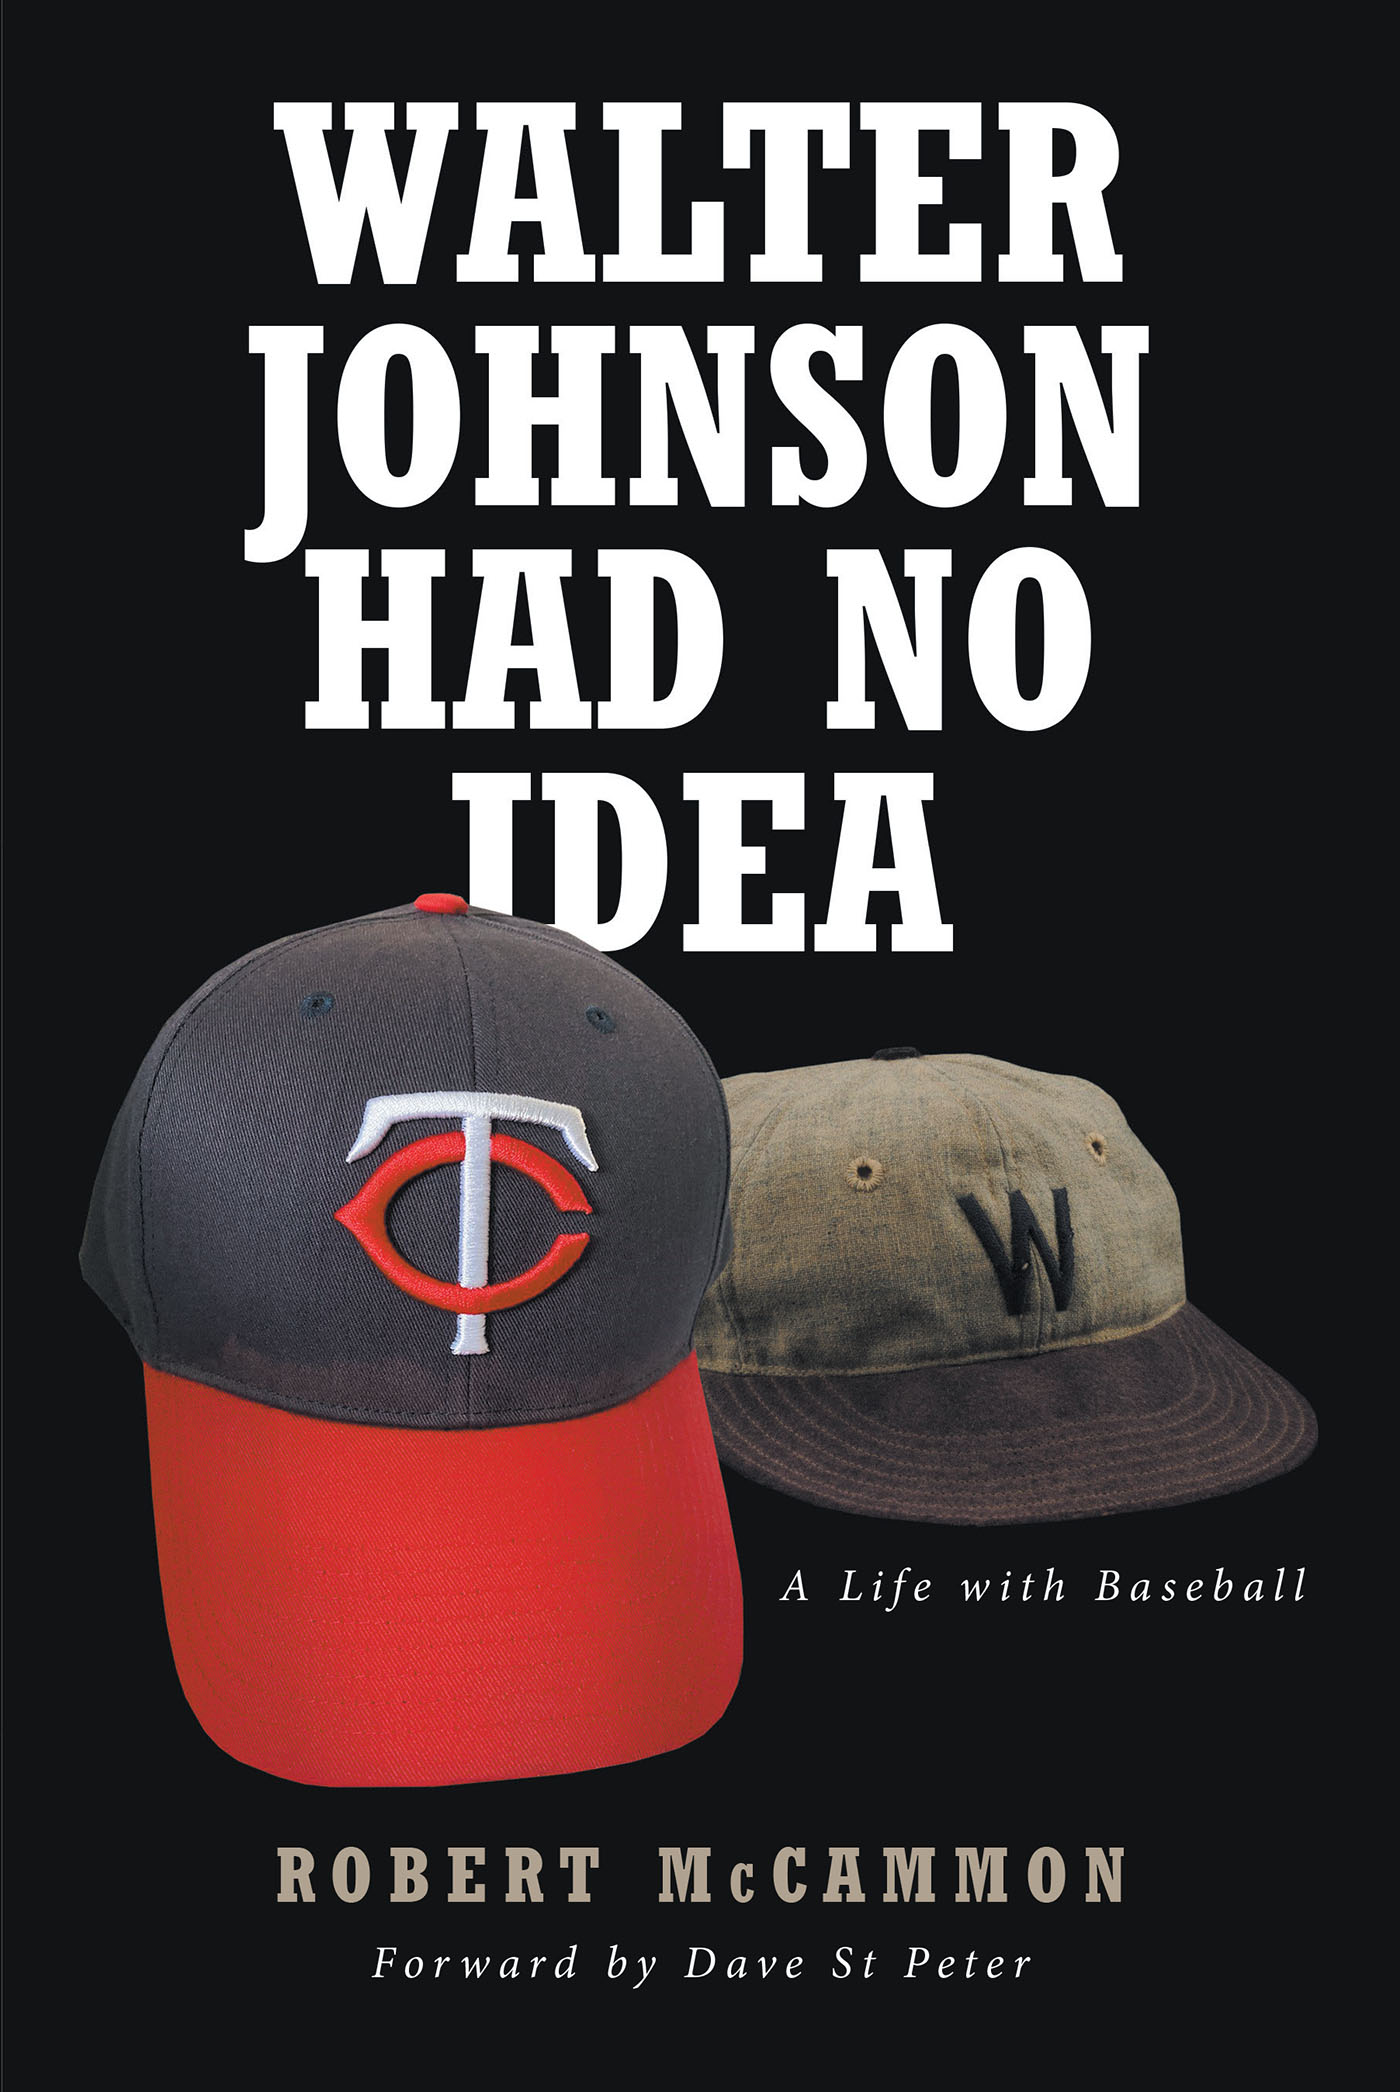 Author Robert McCammon’s New Book, "Walter Johnson Had No Idea," is a Stirring History of the Author's Family and Their Love of Baseball That Binds Generations Together